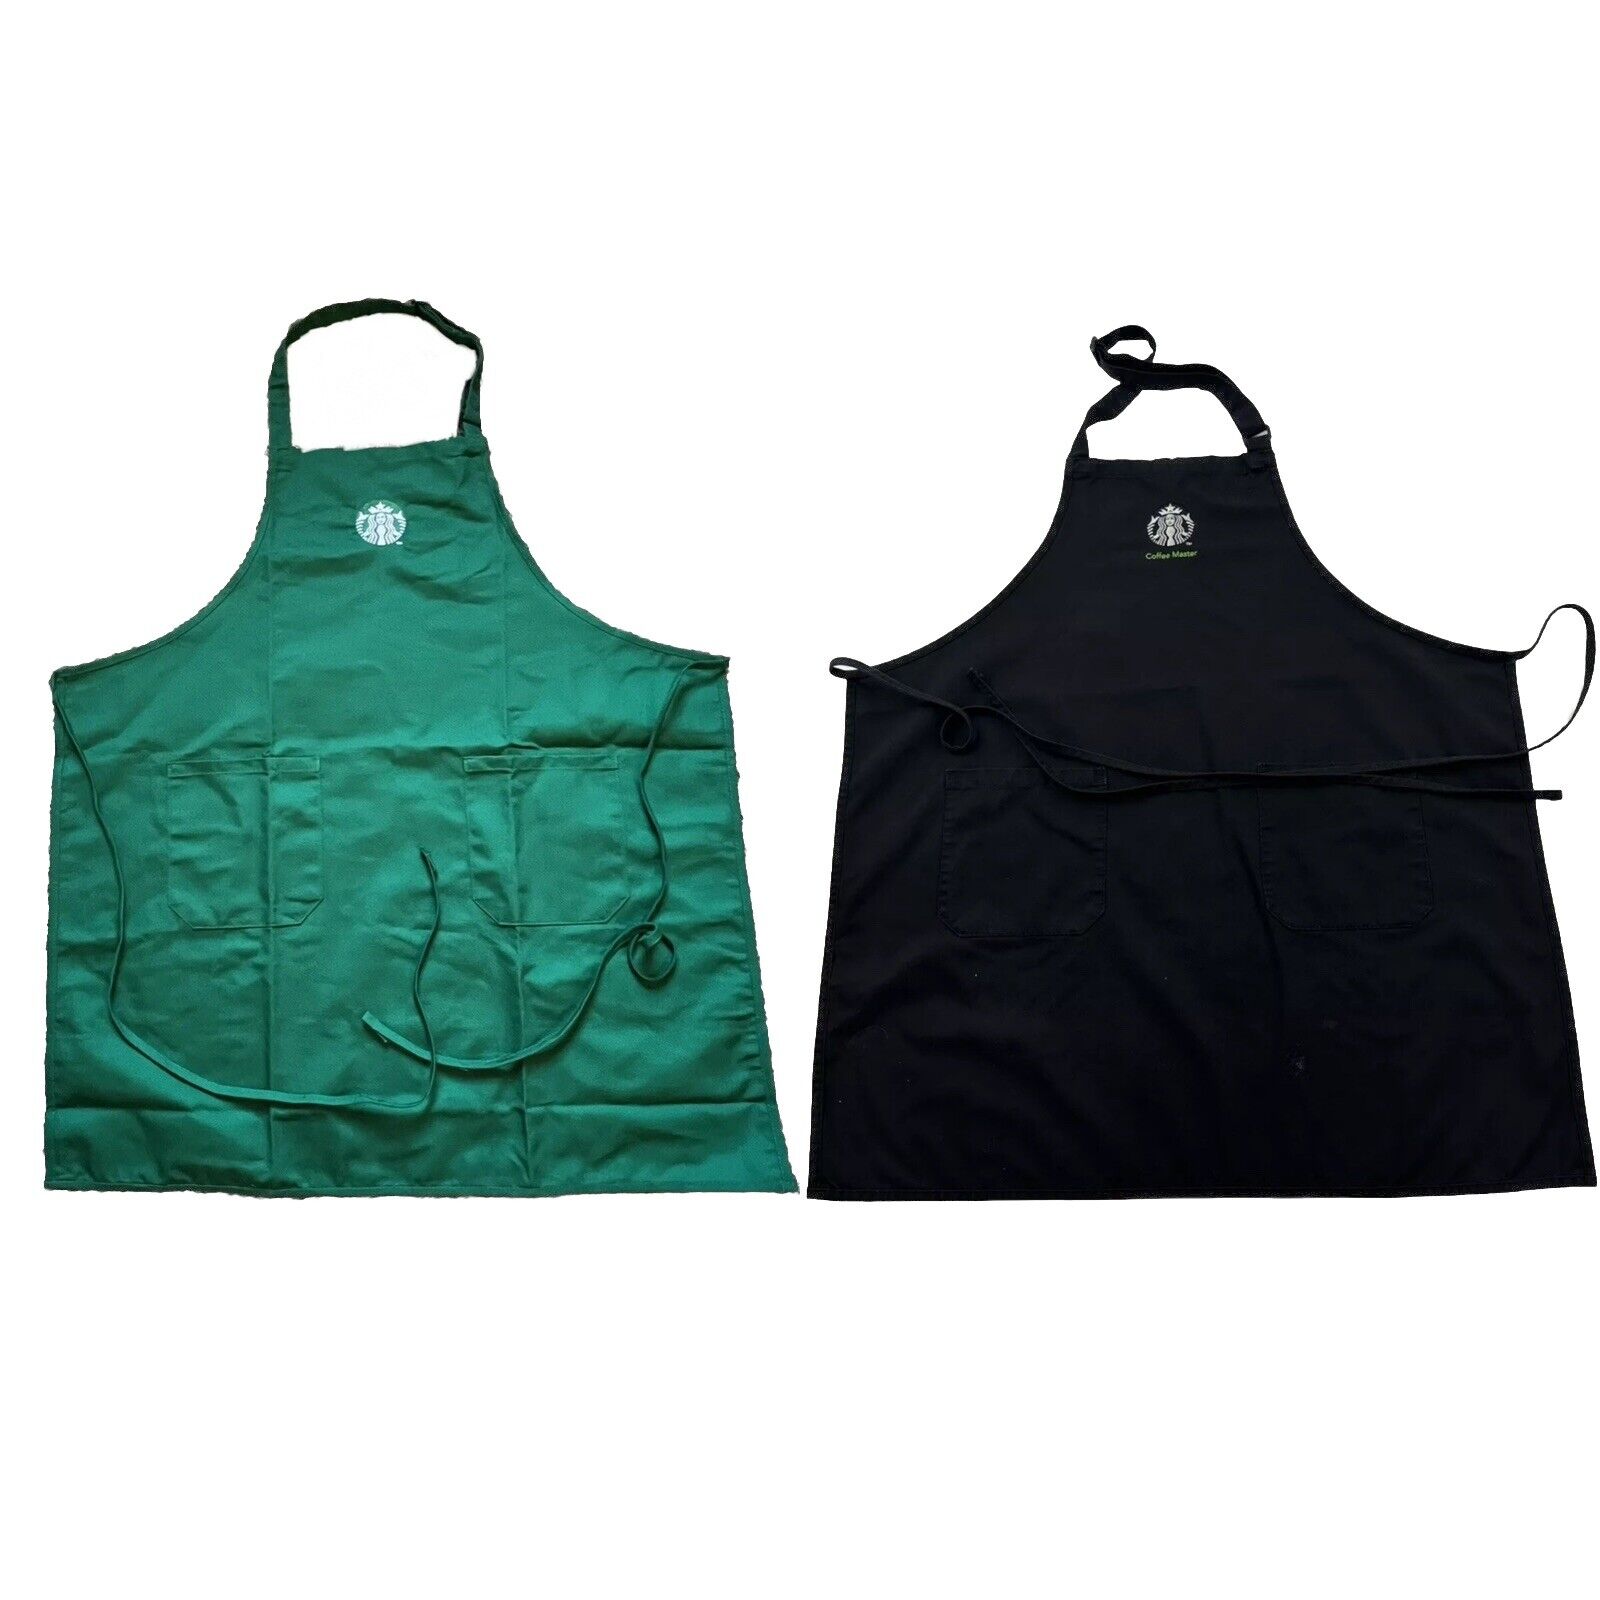 Starbucks Coffee Master Apron And Green Apron Used Recently Washed